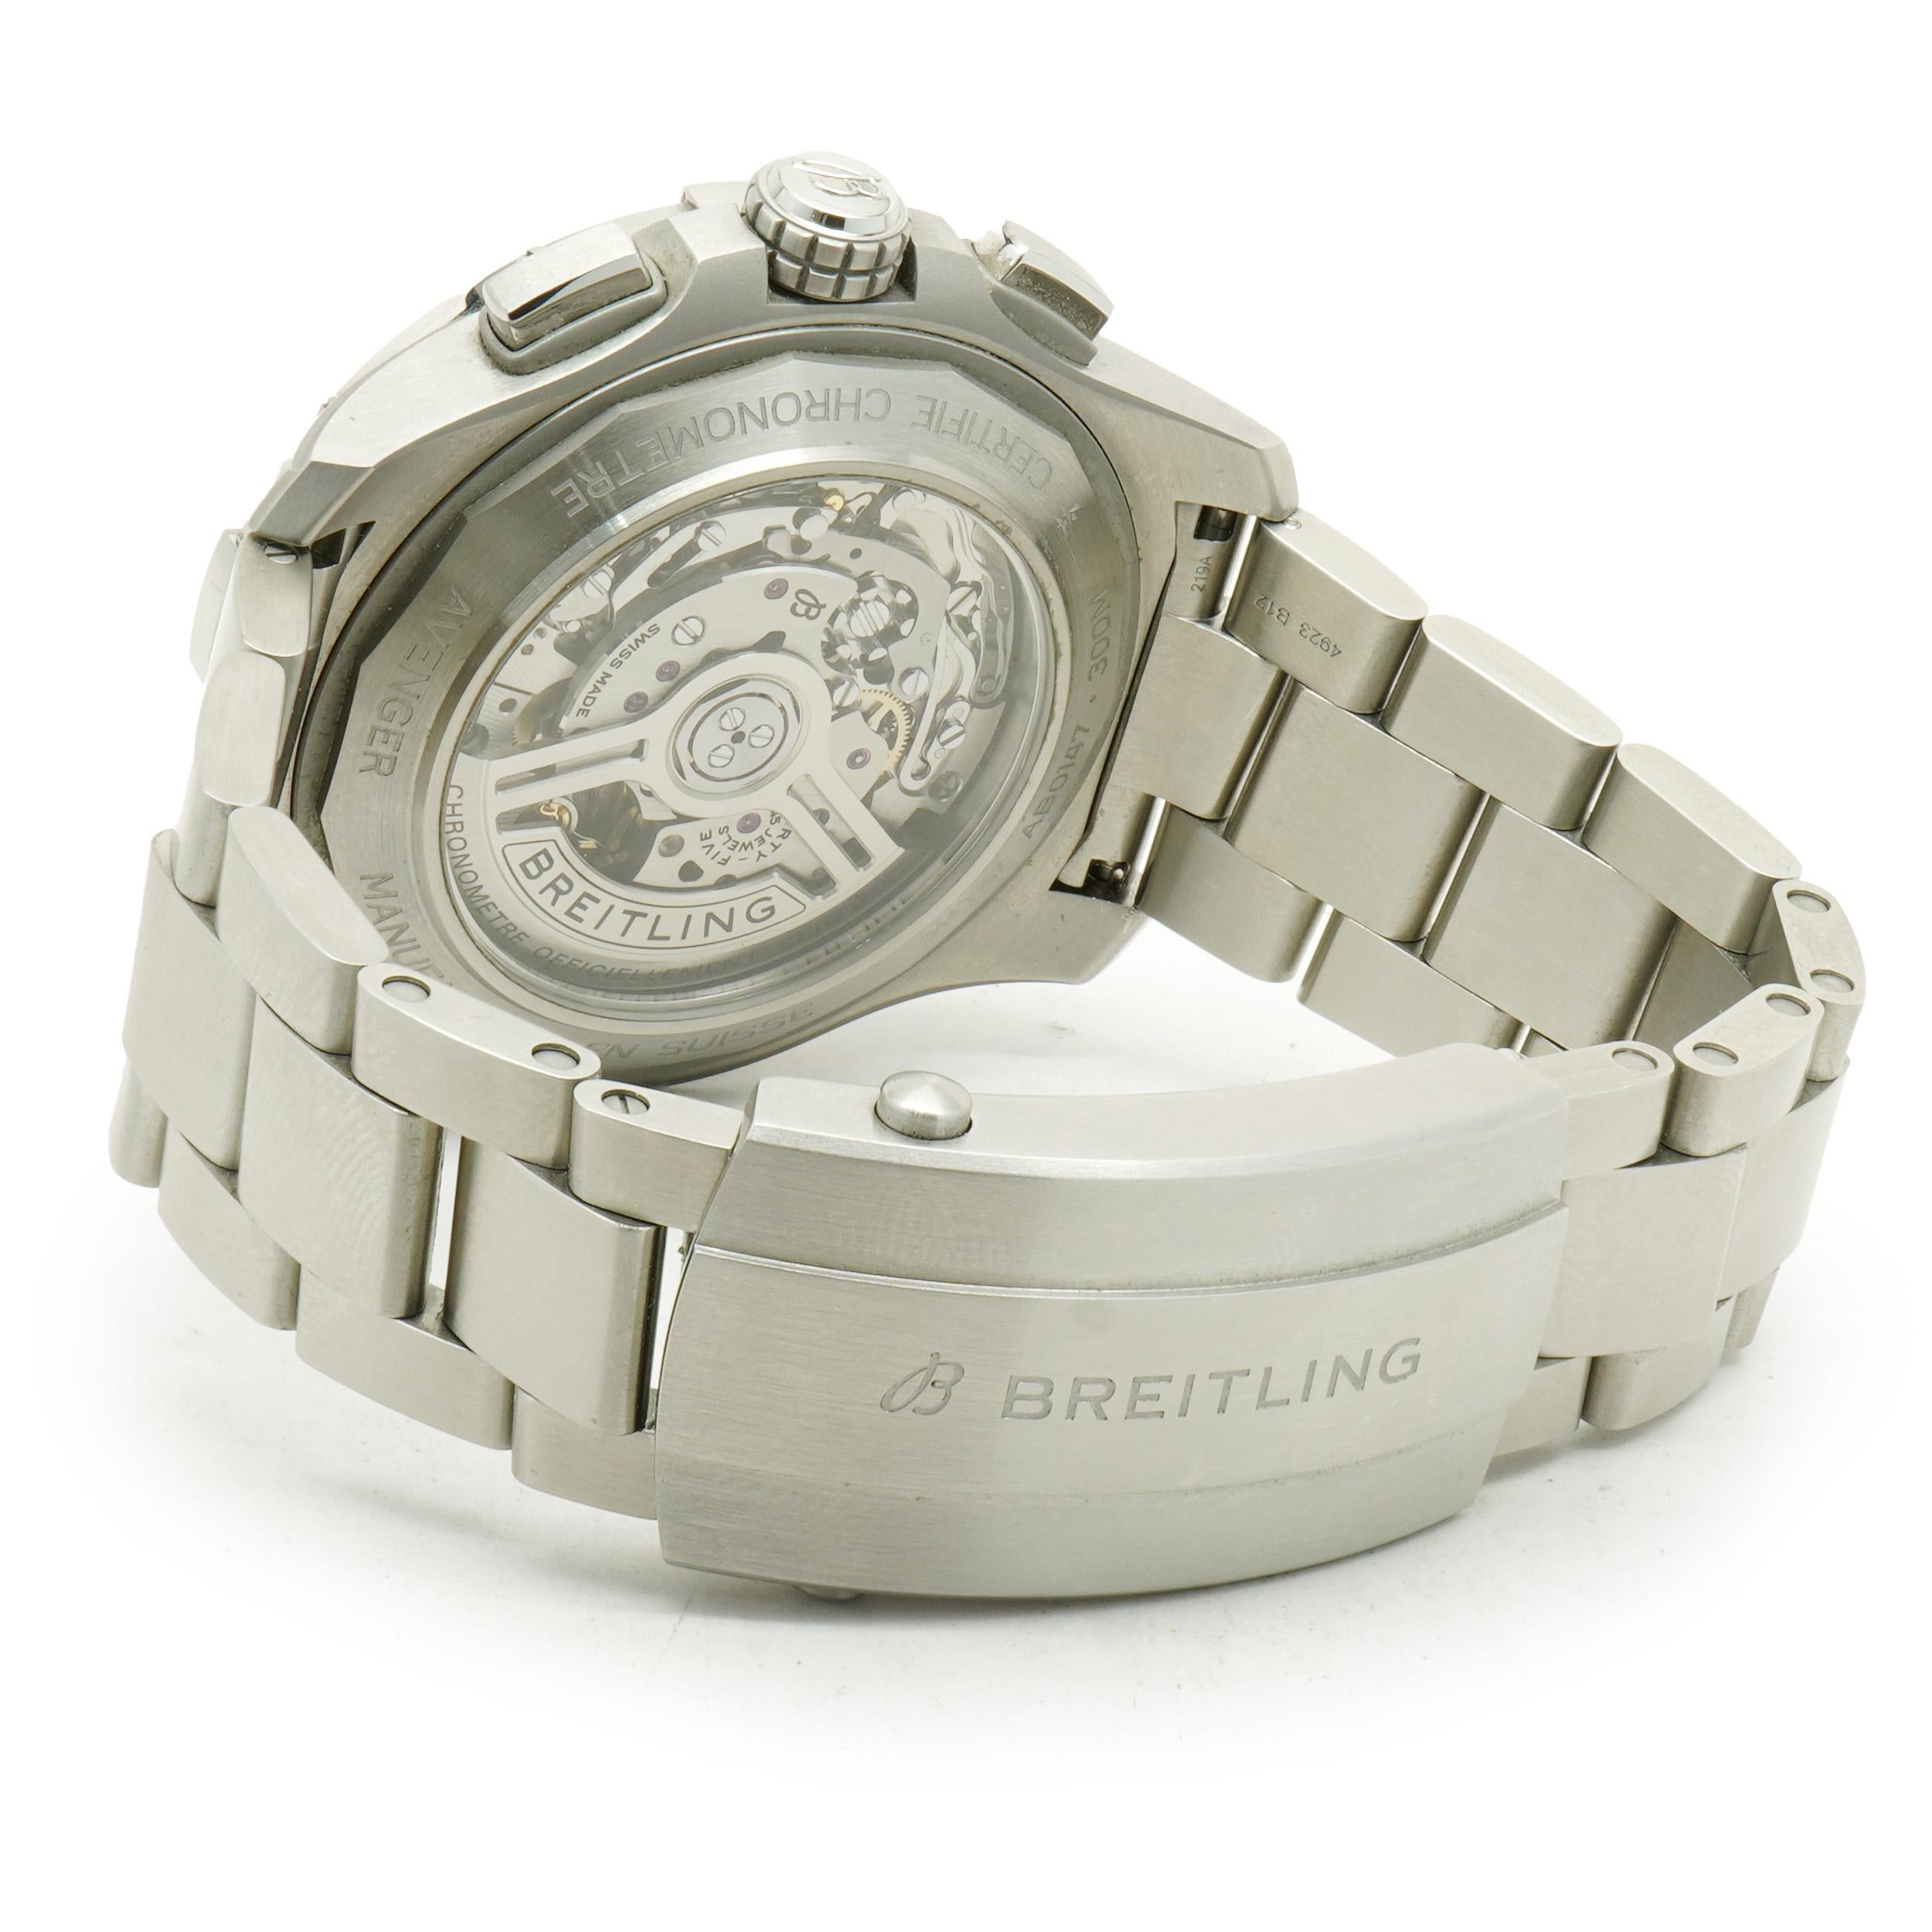 Breitling Stainless Steel Avenger B01 Chronograph 44mm In Excellent Condition For Sale In Scottsdale, AZ